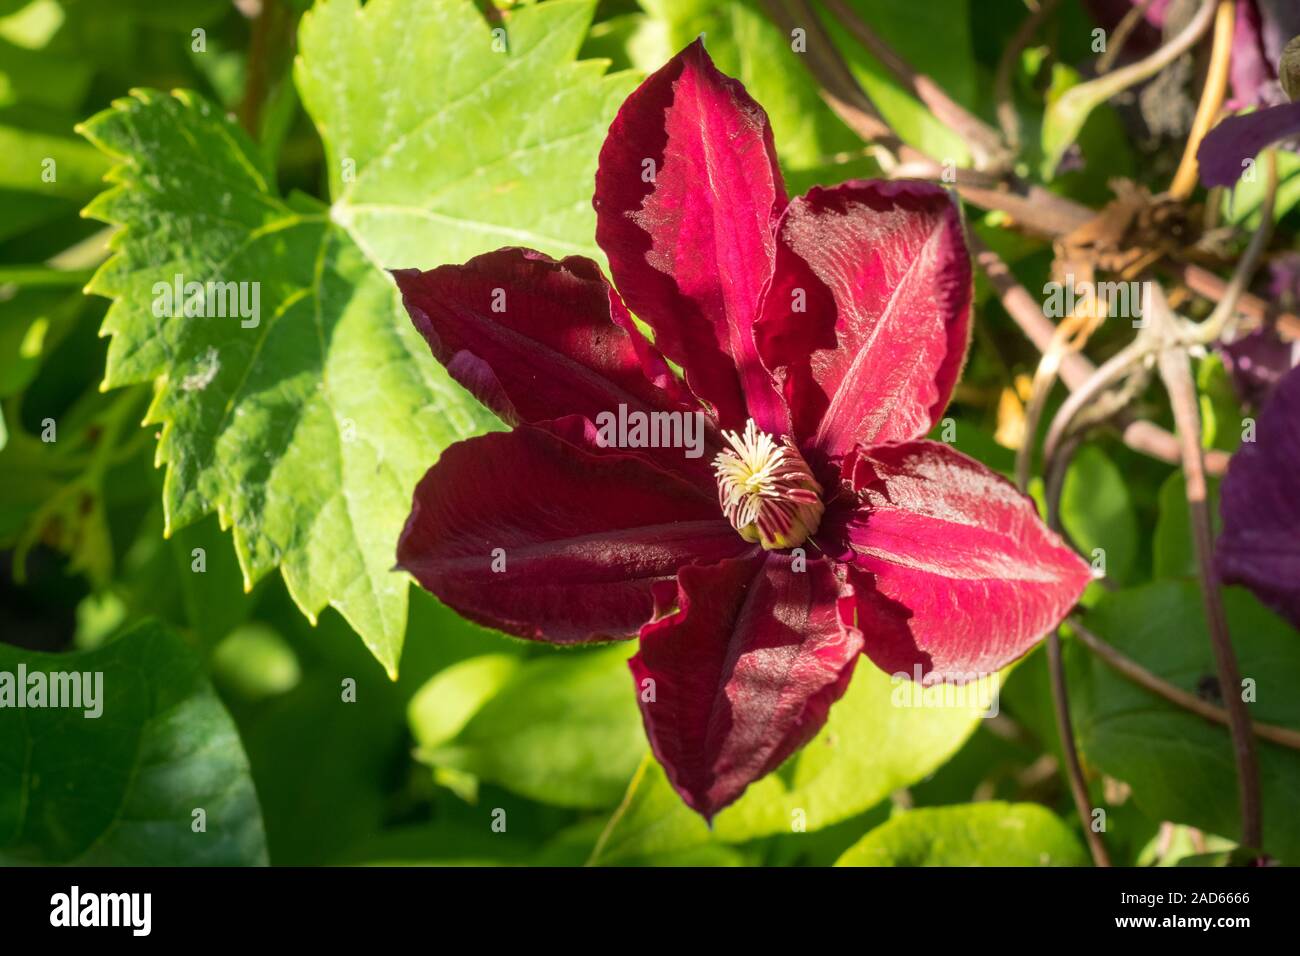 Large flowered Clematis cultivar with deep red burgundy color in a backyard garden Stock Photo